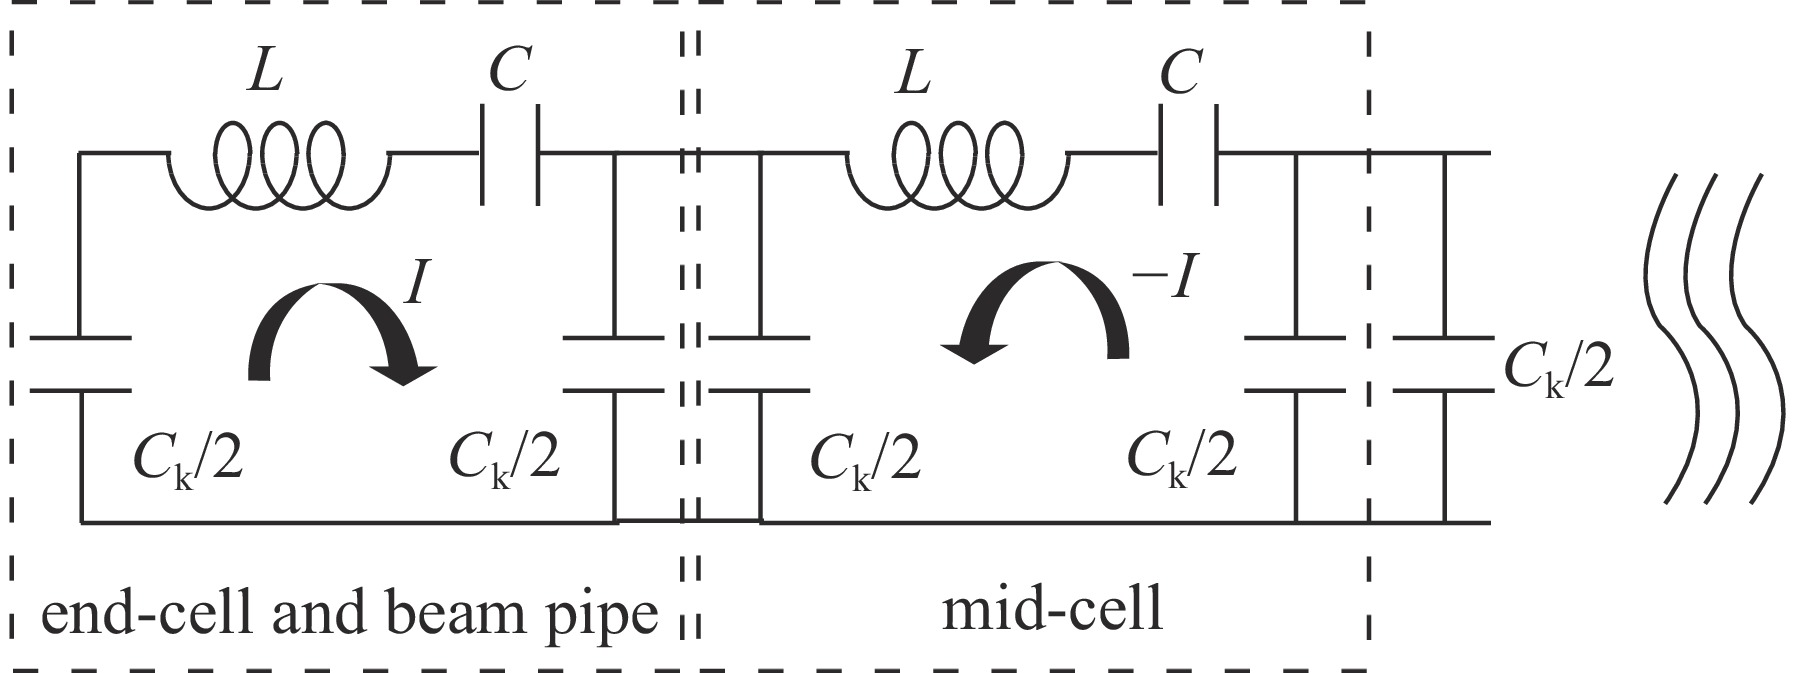 The model of equivalent circuit for N-cell cavity operating in fundamental π-mode with ideal field flatness